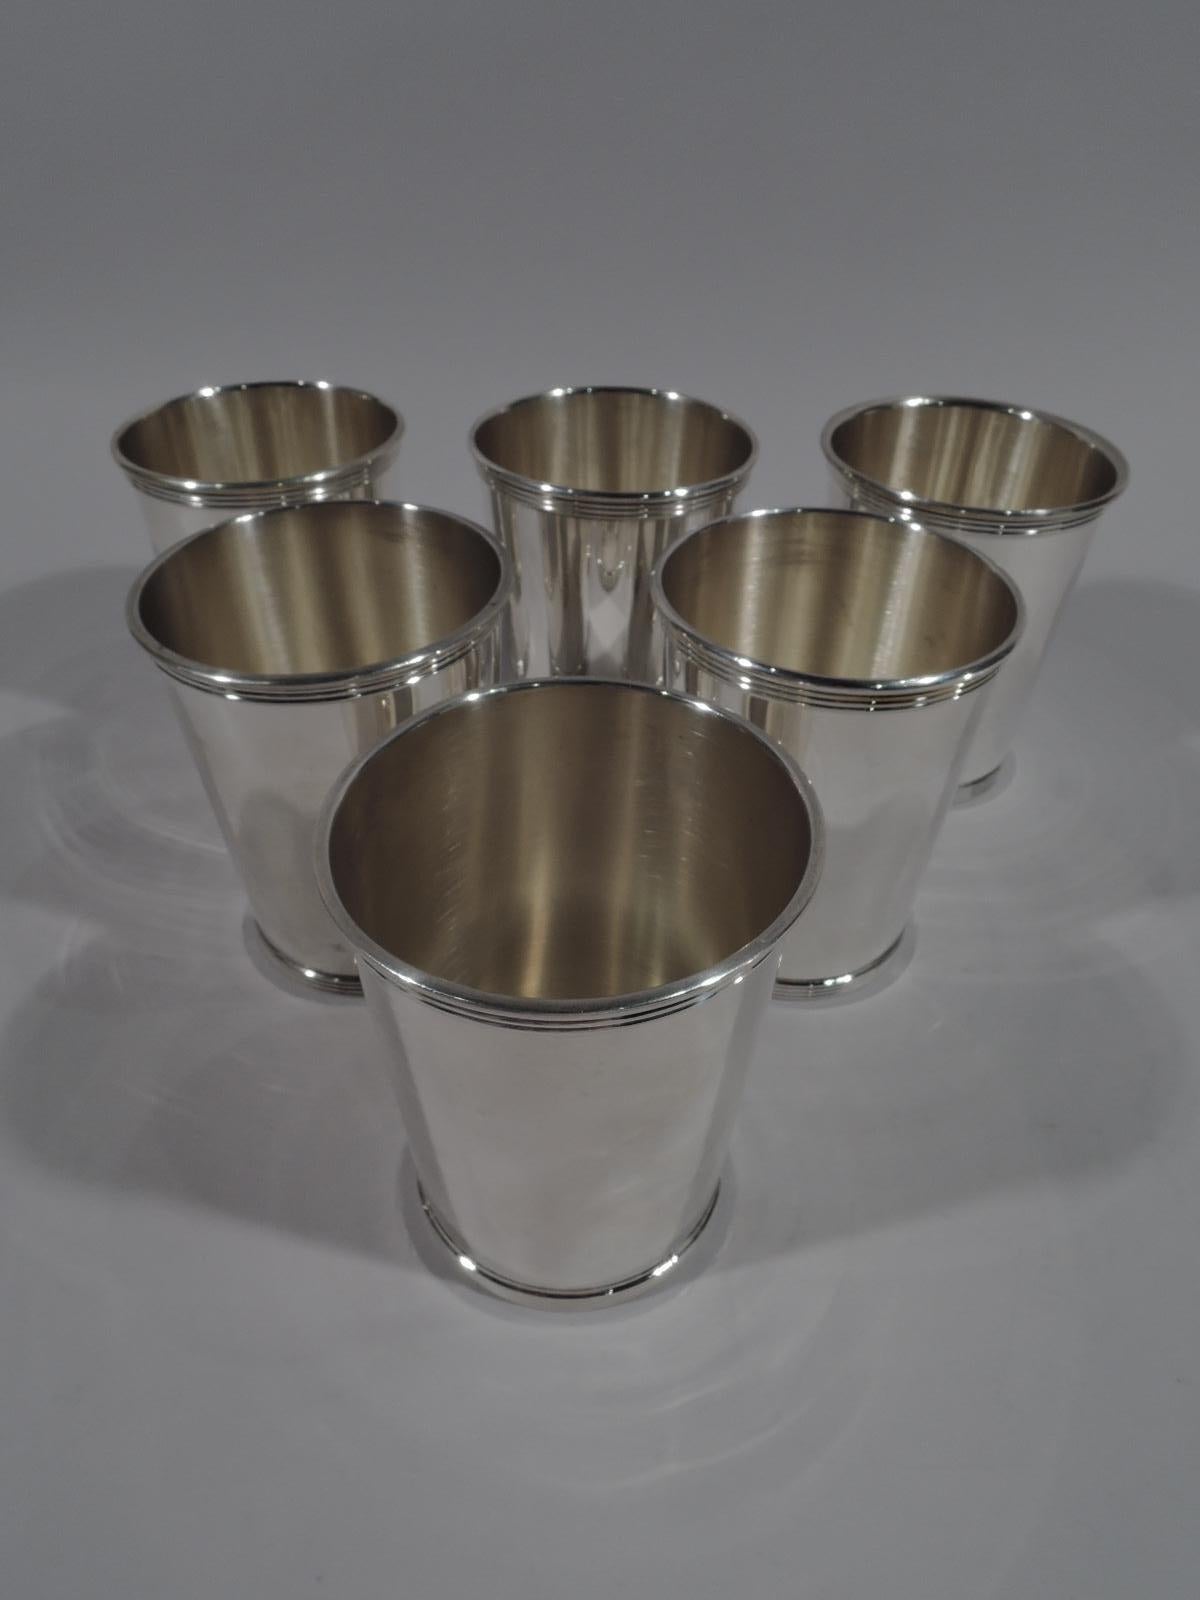 Set of 6 sterling silver mint julep cups. Made by Gorham in Providence. Each: Straight and tapering sides, molded and reeded rim, and reeded foot. Marked “Newport / Sterling 1673”. Newport was a Gorham brand. Total weight: 23 troy ounces.